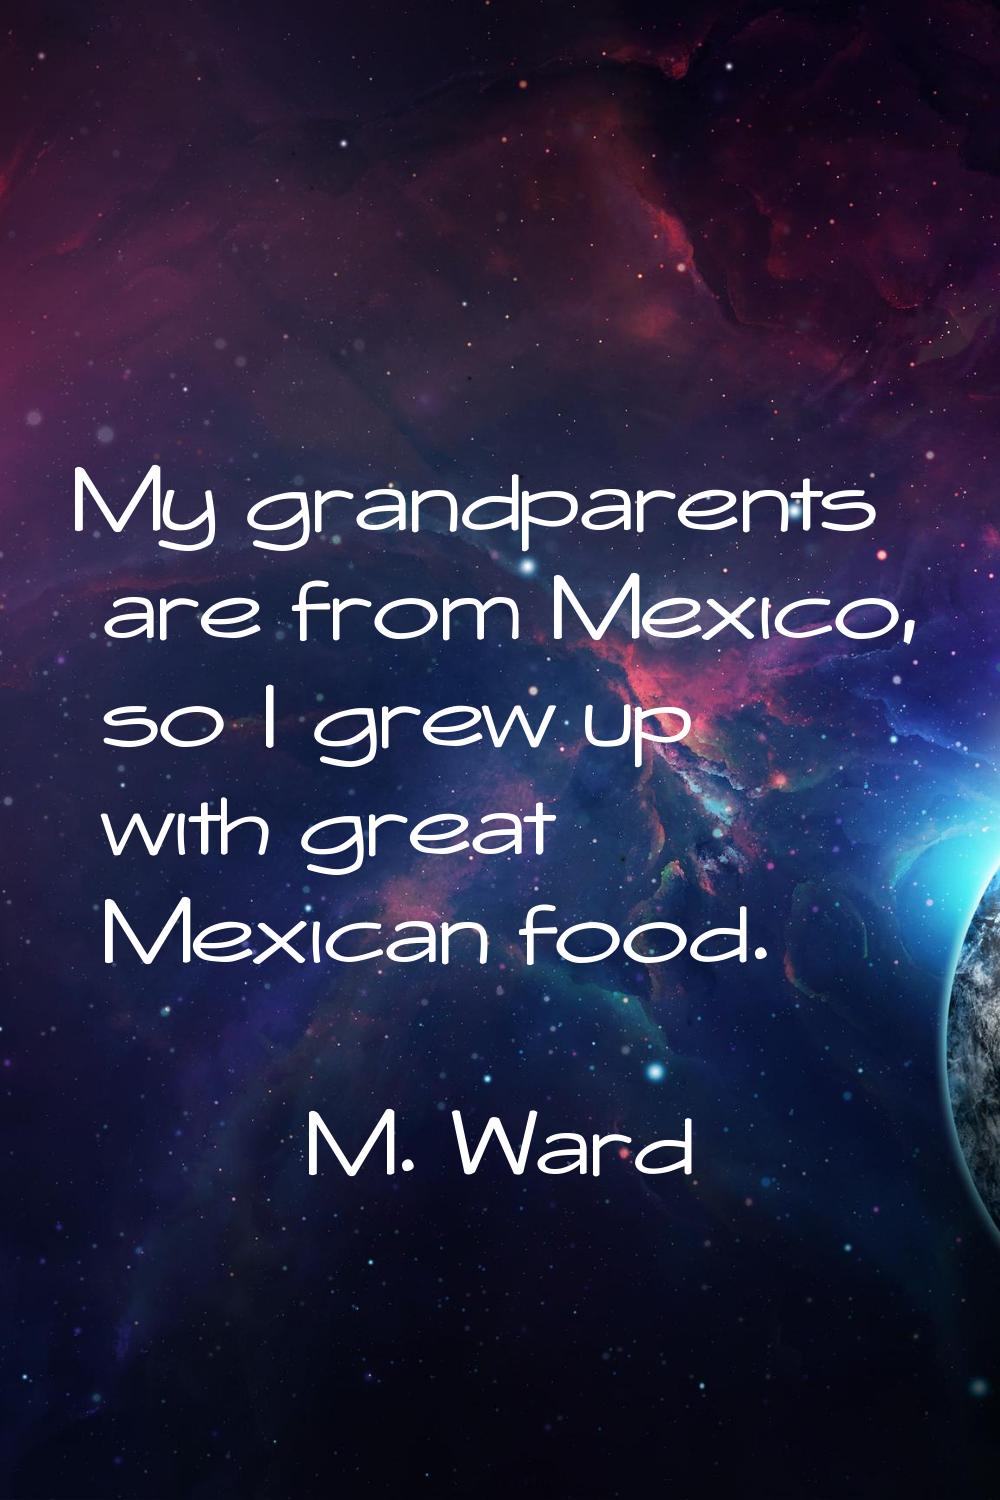 My grandparents are from Mexico, so I grew up with great Mexican food.